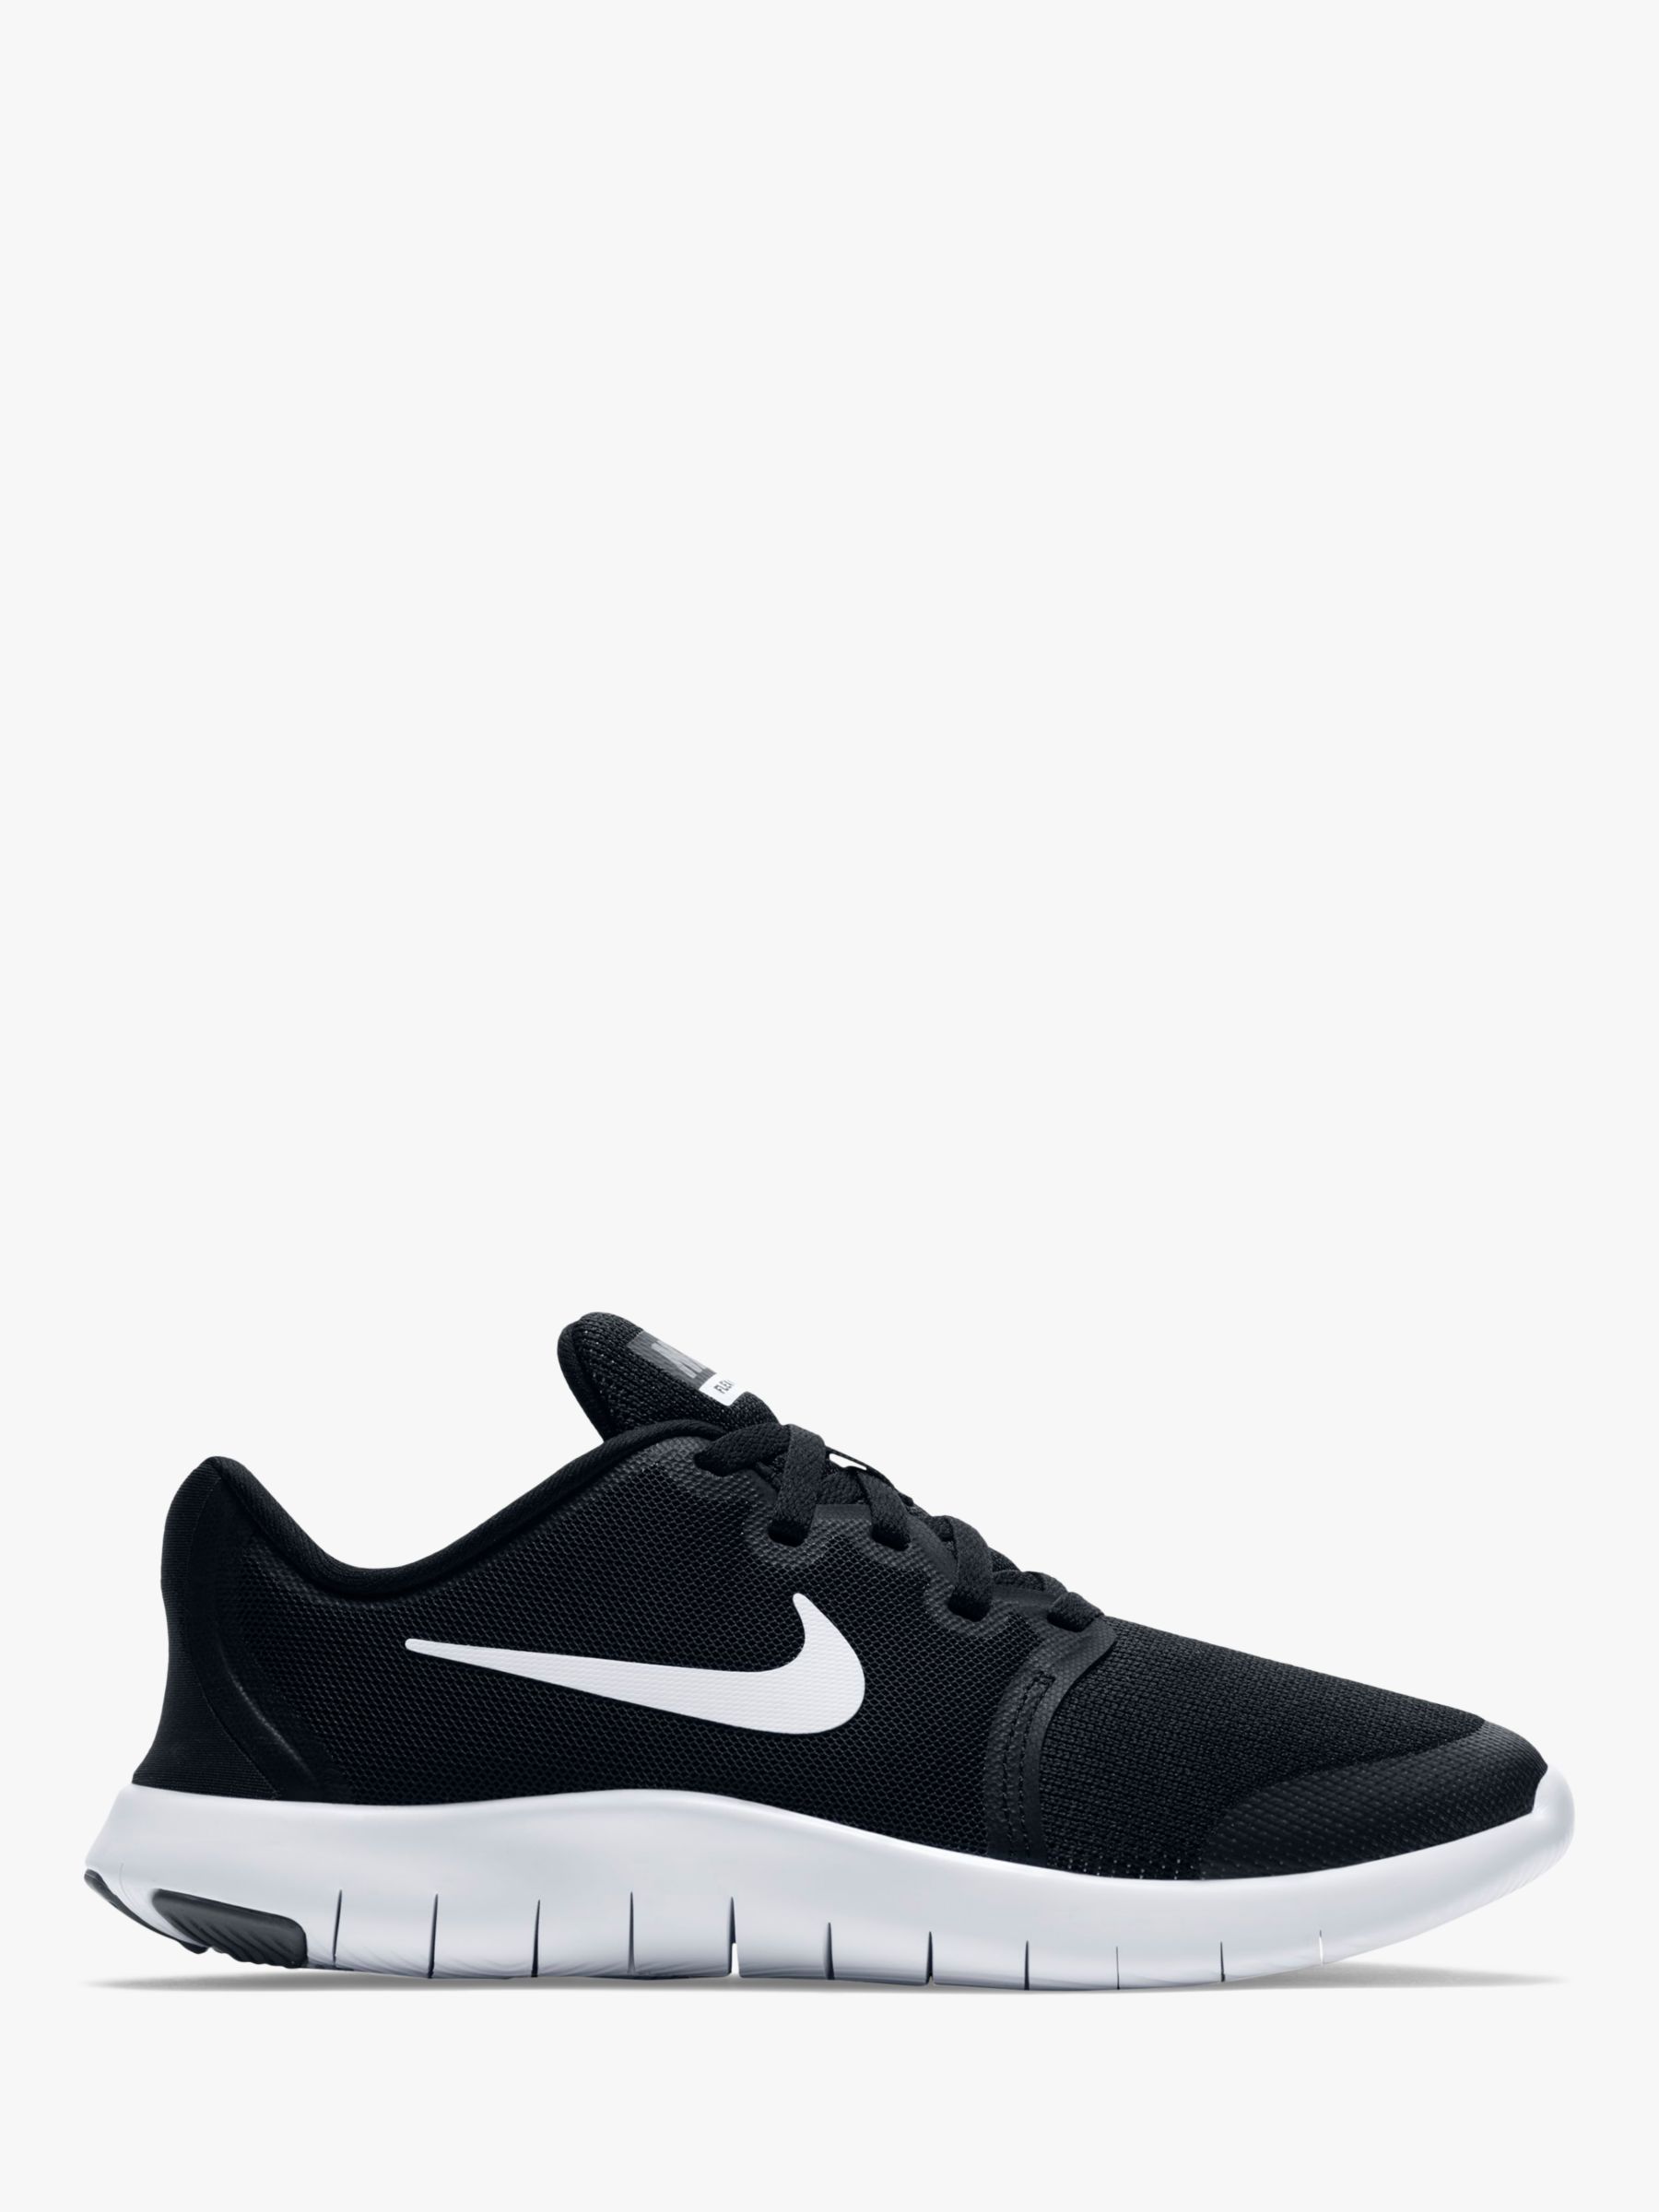 Nike Flex Contact 2 Trainers, Black/Cool Grey